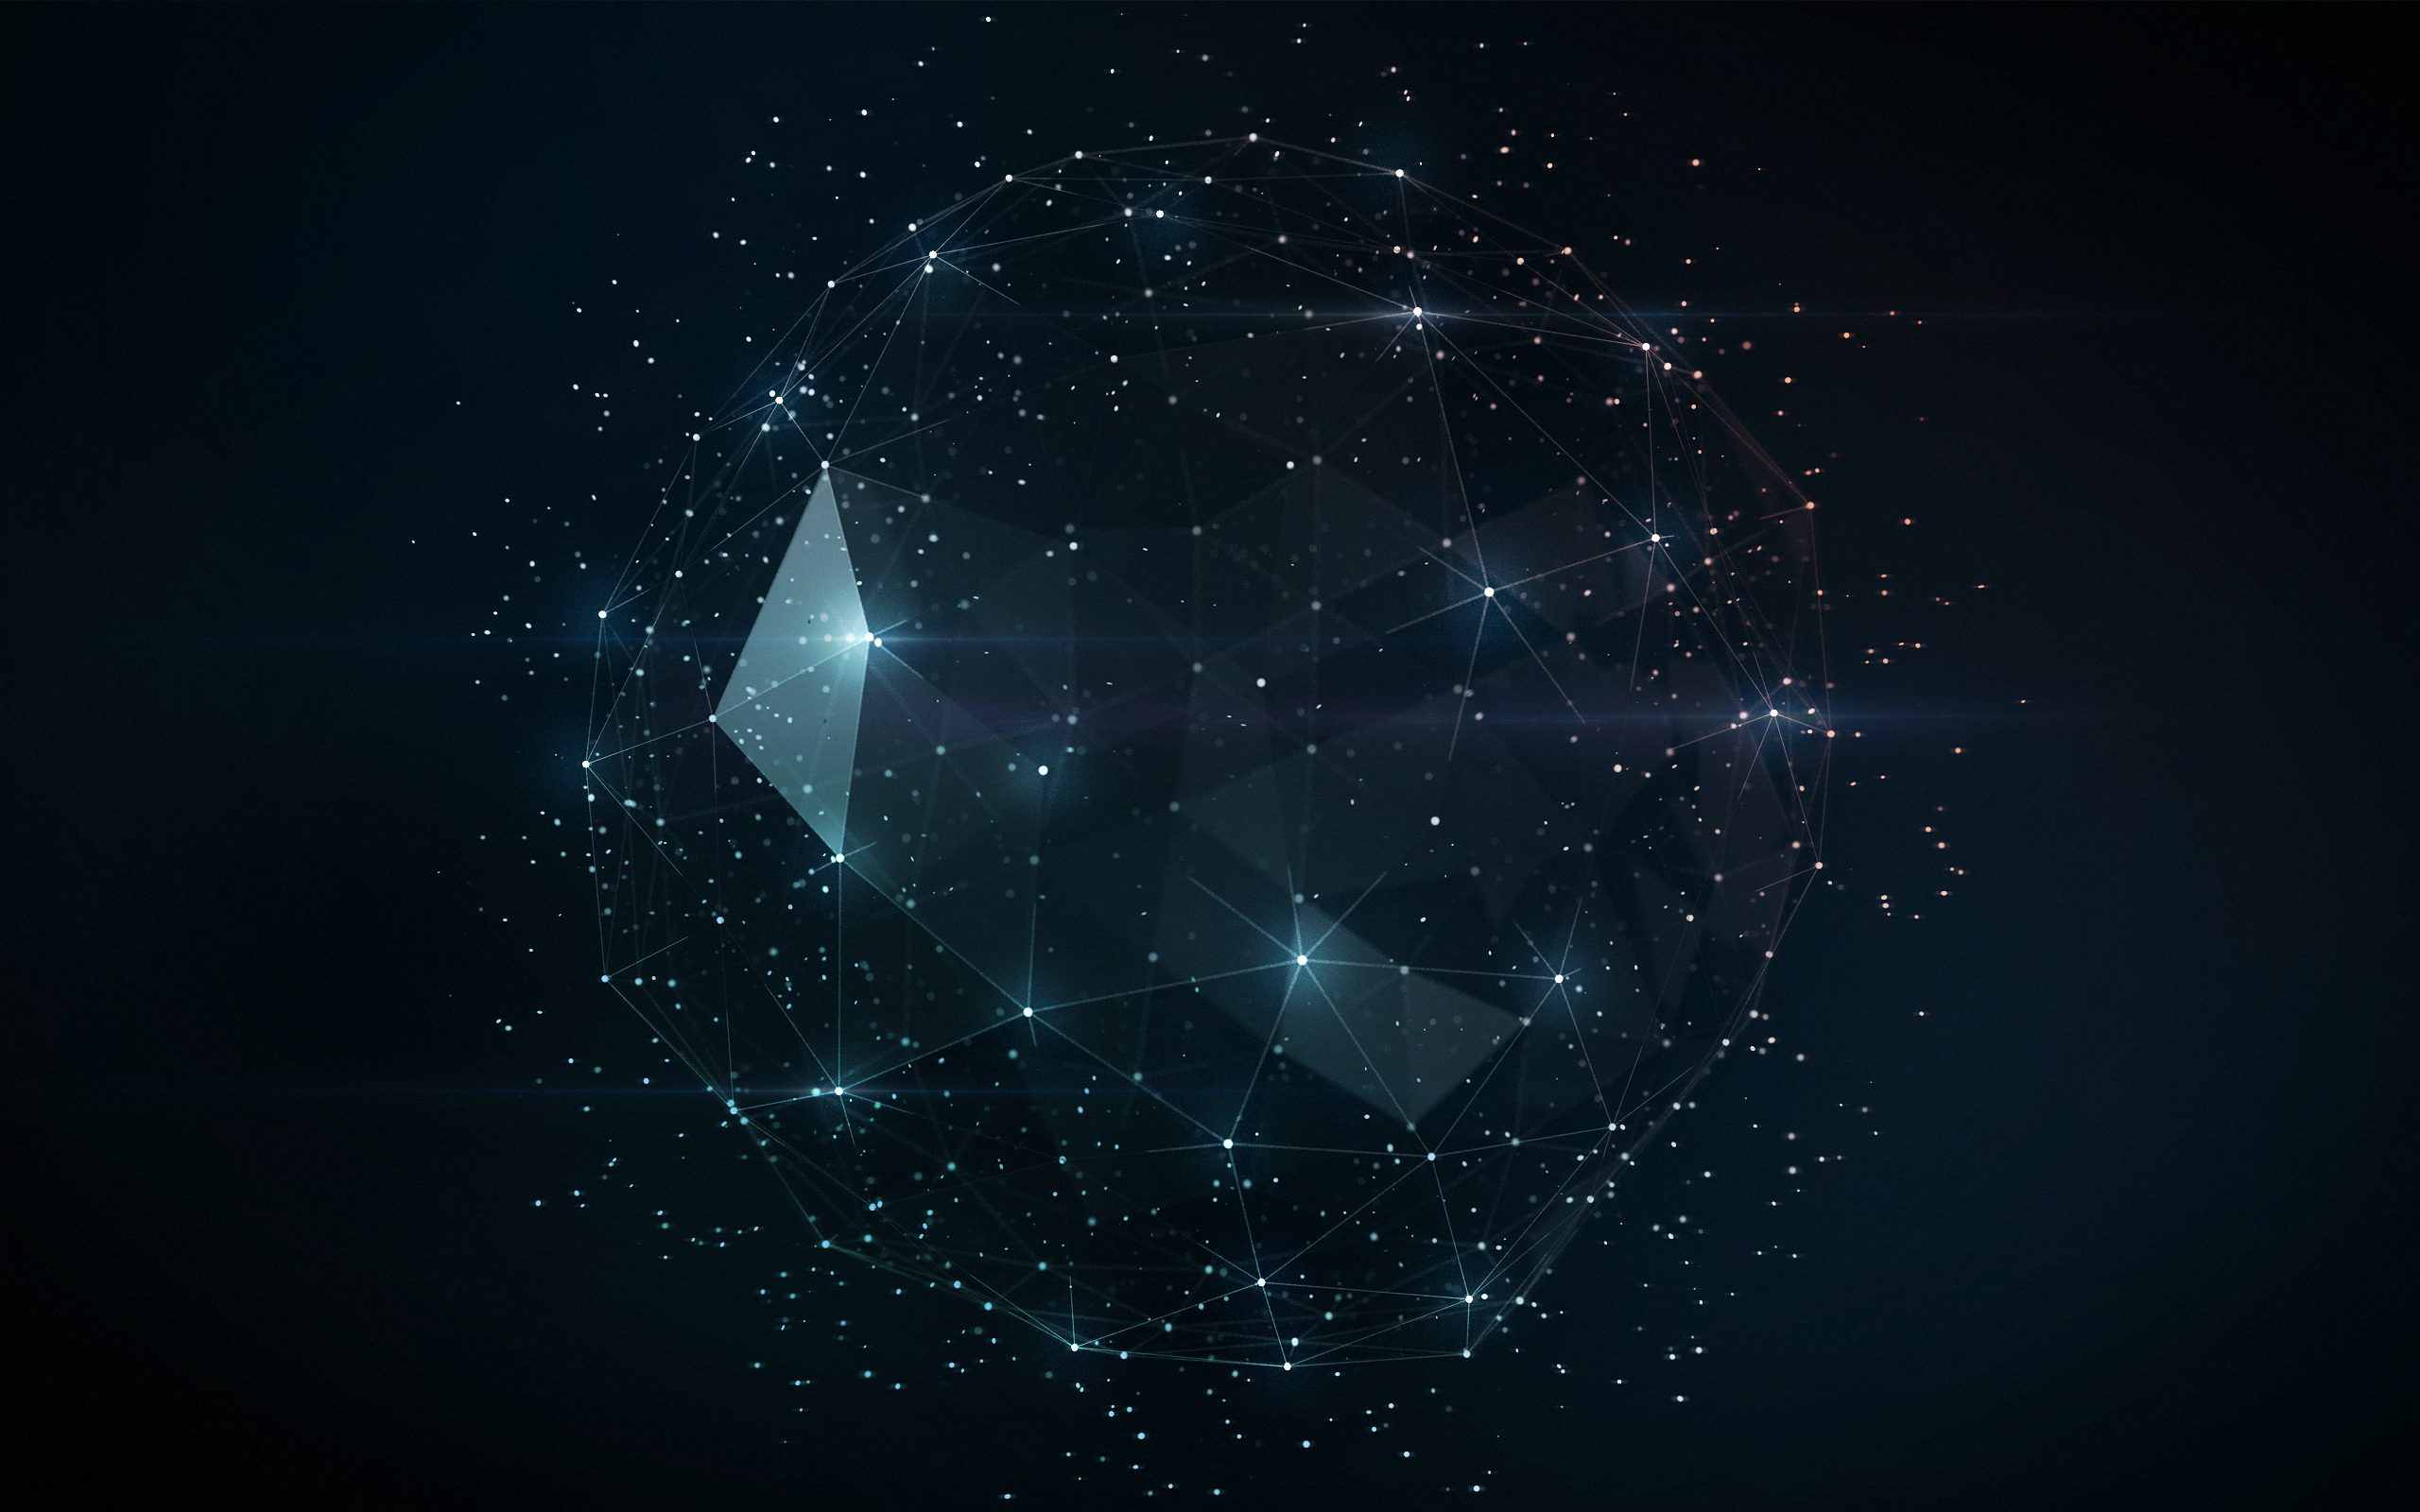 Wallpaper, low poly, wireframe, digital art, star trails, stars, abstract 2560x1600